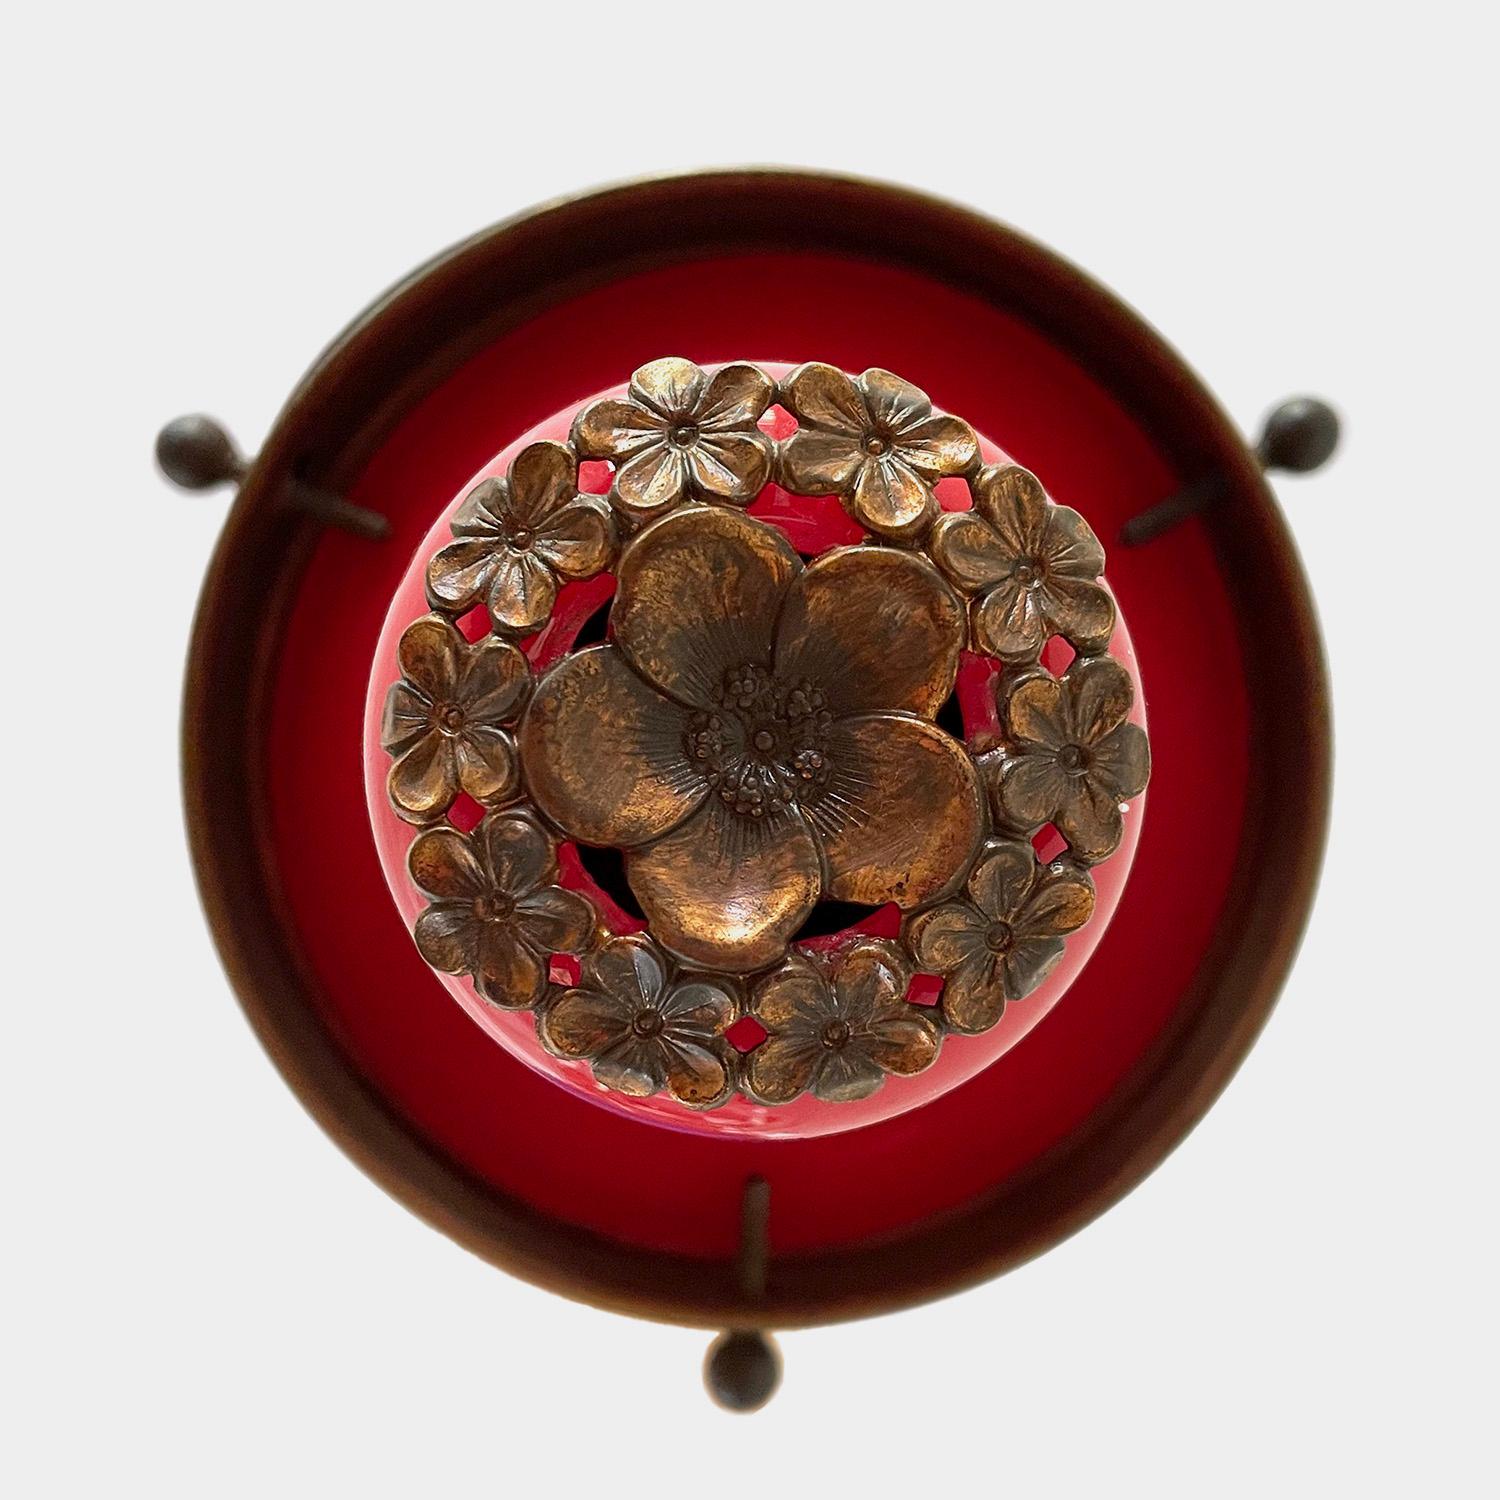 French iron & glass pendant light.
France, circa 1940s
Cathedral dome frame is suspended by a single hook
Red porcelain-like shade is adorned with a brass florette sculpture
Newly rewired
Single socket medium base.

6.25